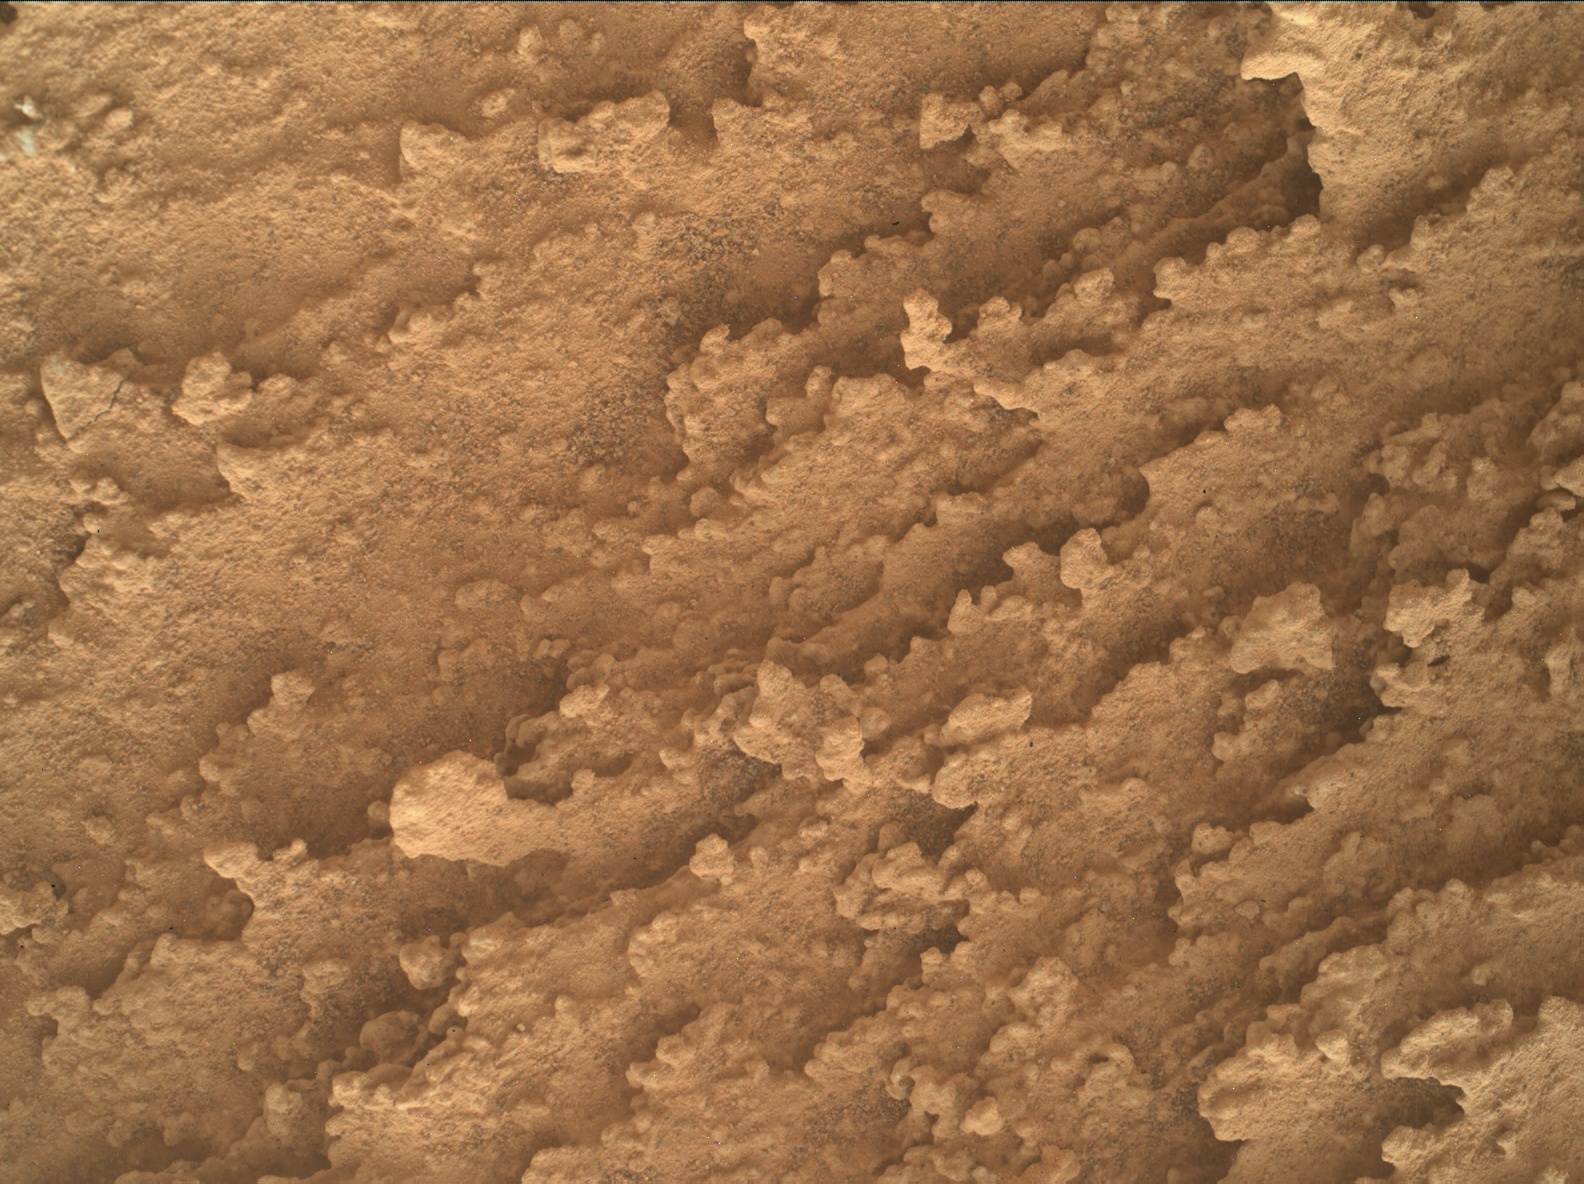 Nasa's Mars rover Curiosity acquired this image using its Mars Hand Lens Imager (MAHLI) on Sol 3780